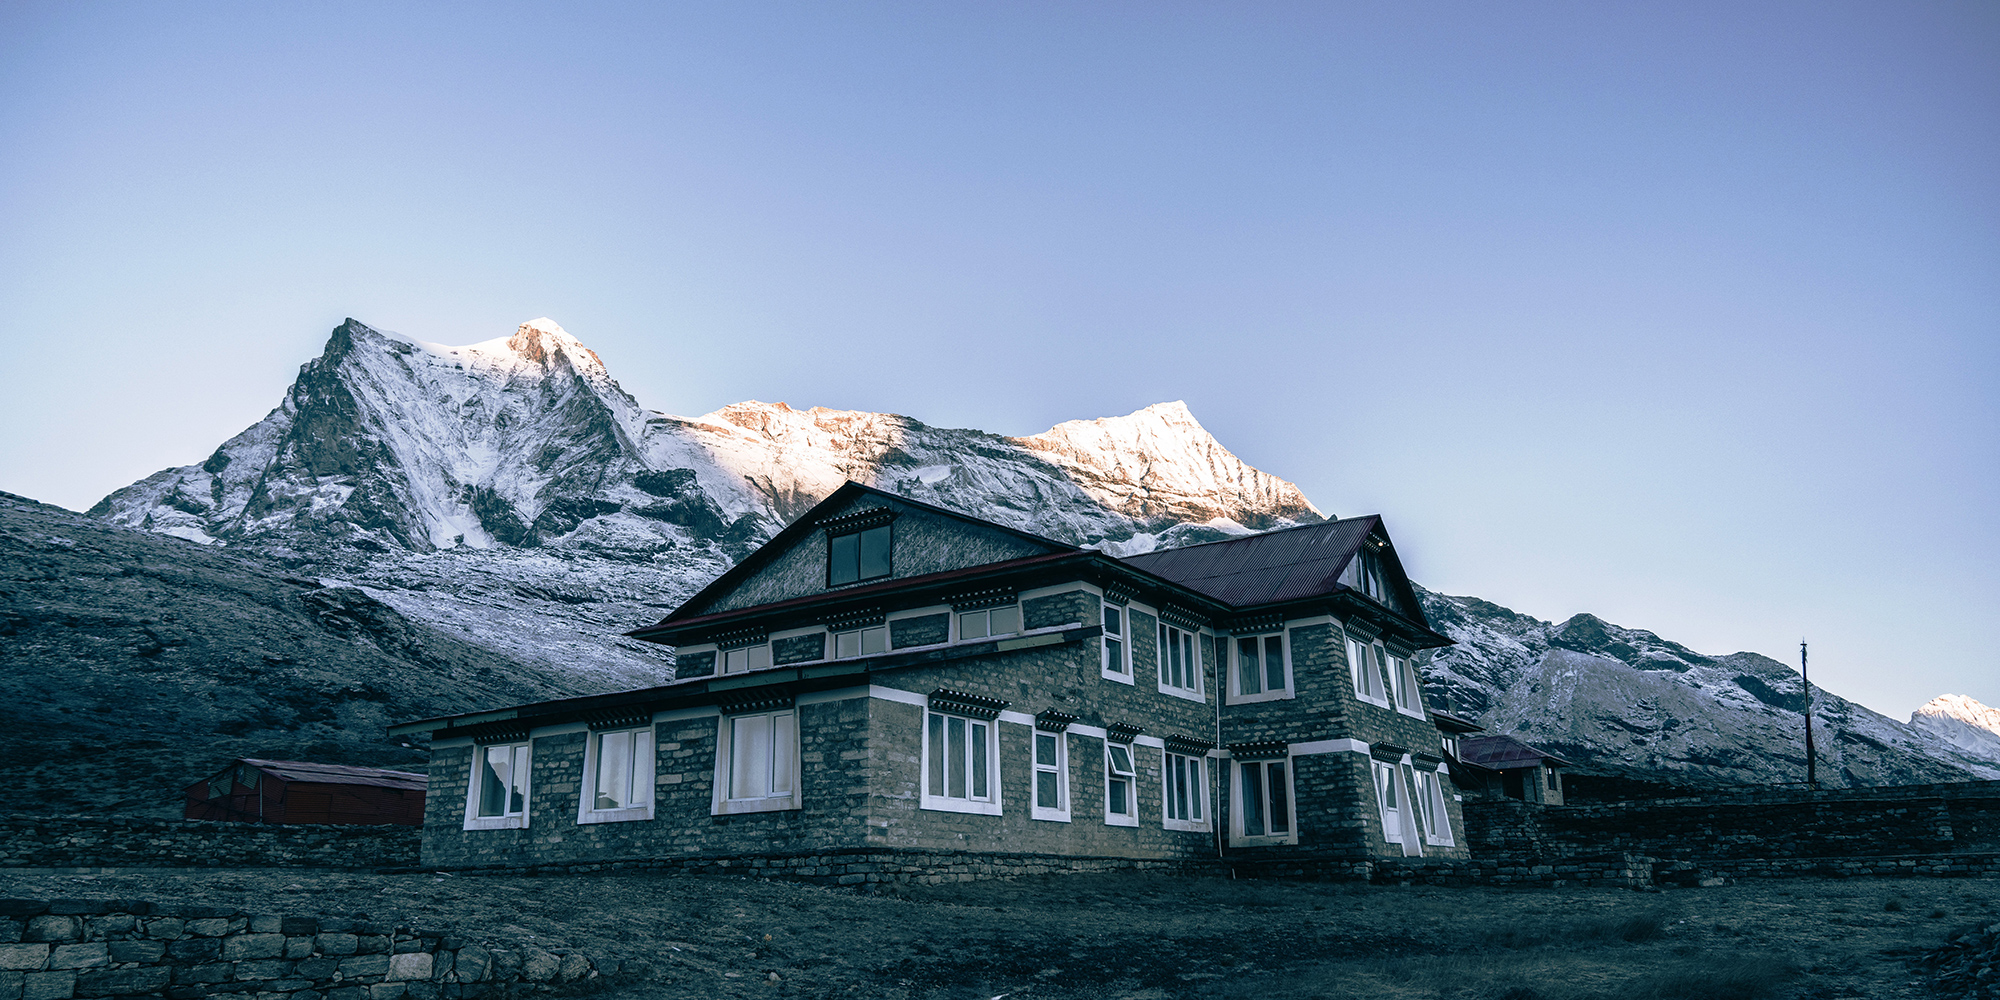 Mountain Lodges of Nepal, Annapurna and Everest regions